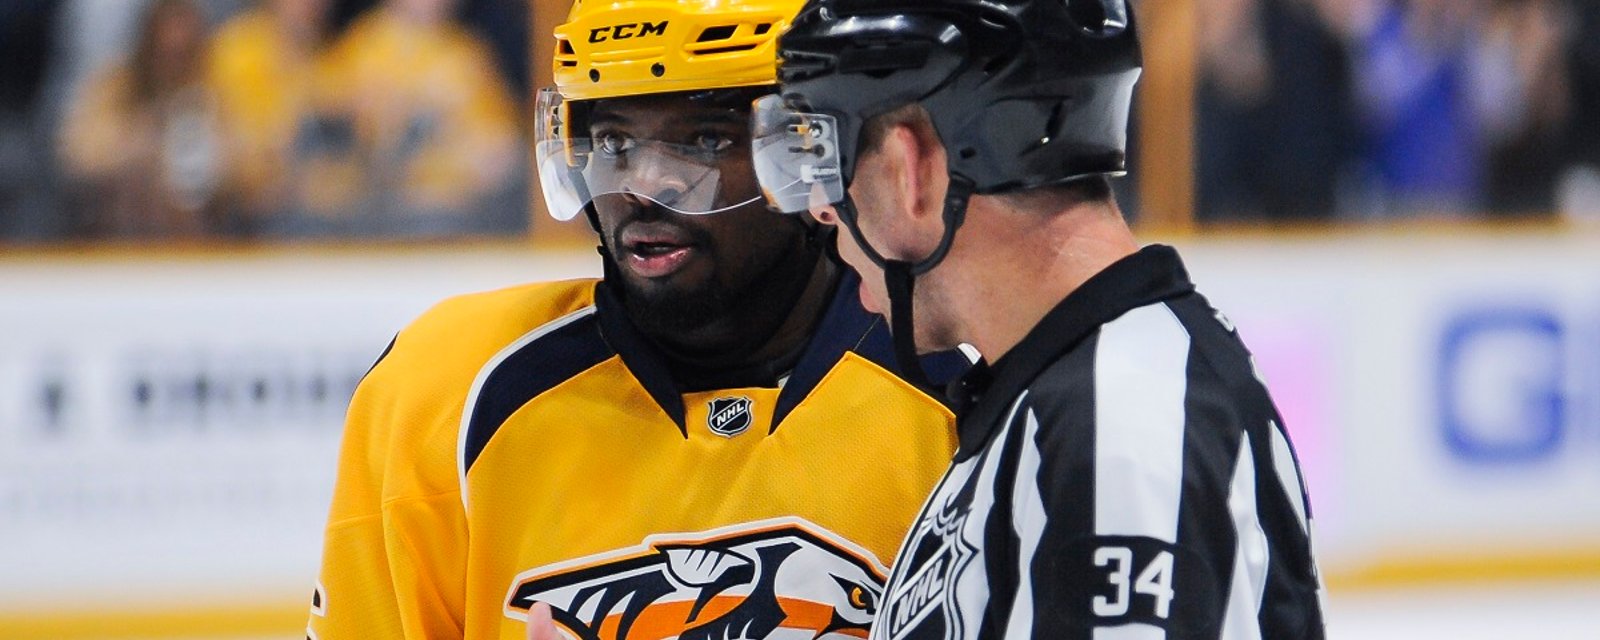 Breaking: Subban scores the overtime winner.... in the wrong net!